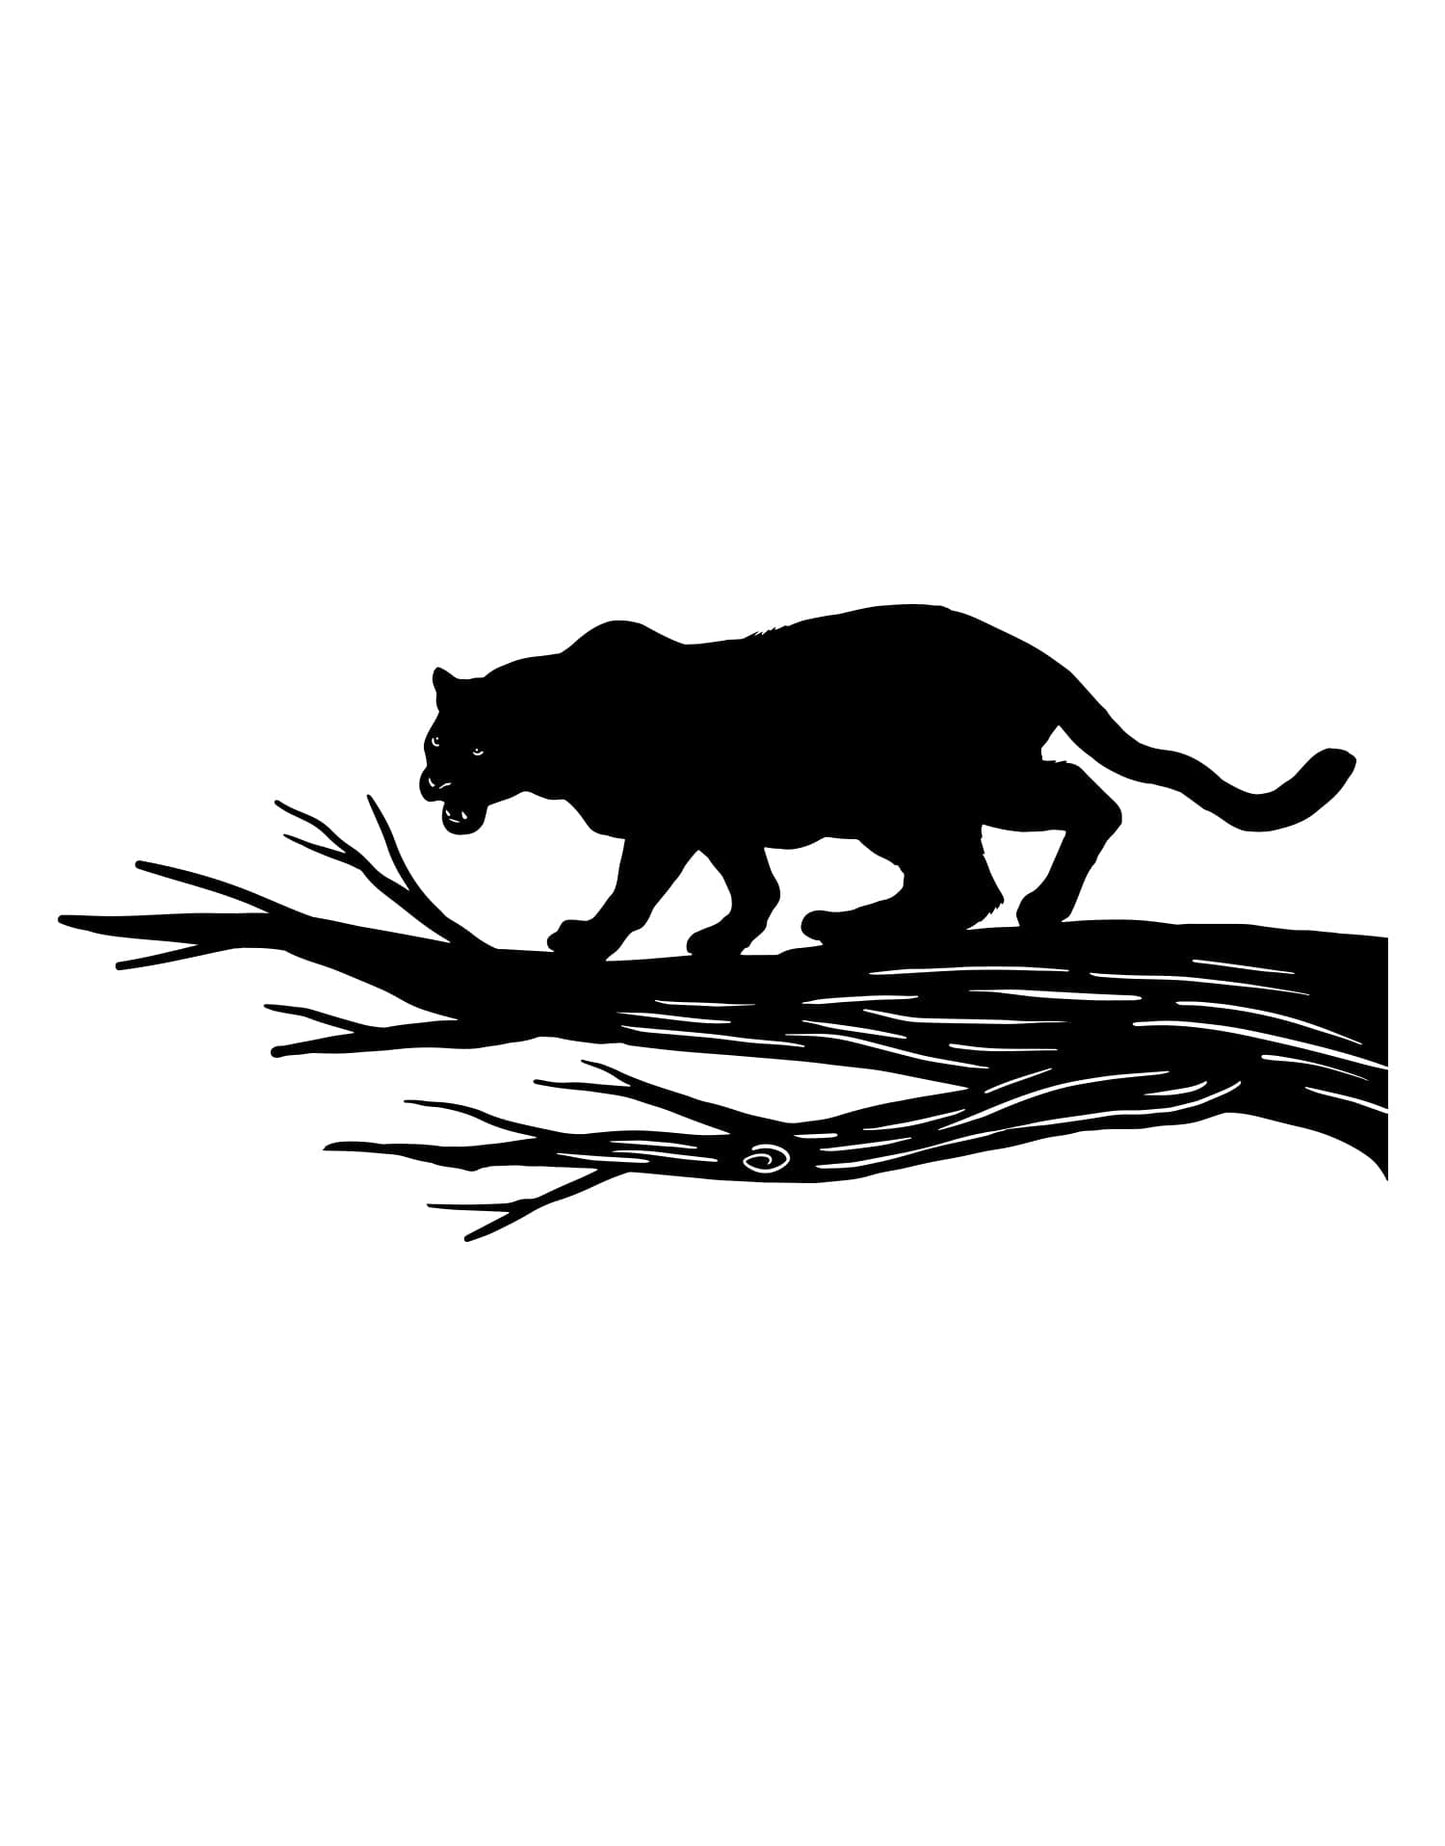 Black Panther Vinyl Wall Decal Sticker. #OS_MB990